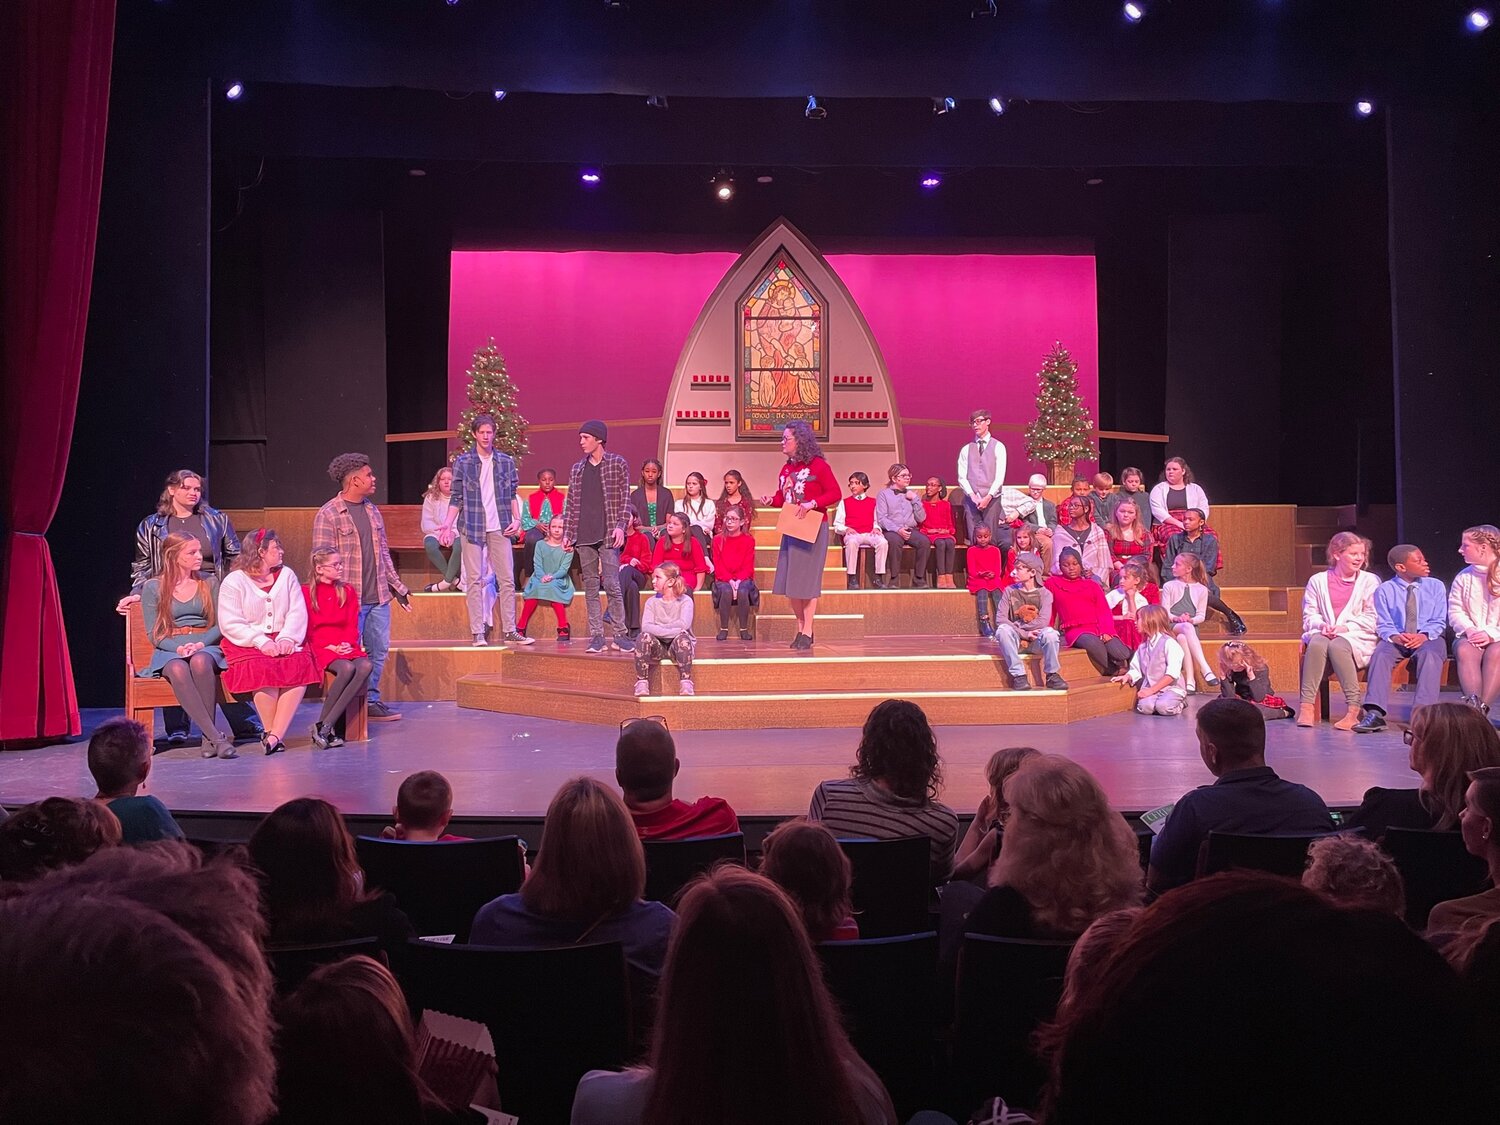 One of the casts from 'The Best Christmas Pageant Ever!,' showing at Cape Fear Regional Theatre through Dec. 17.